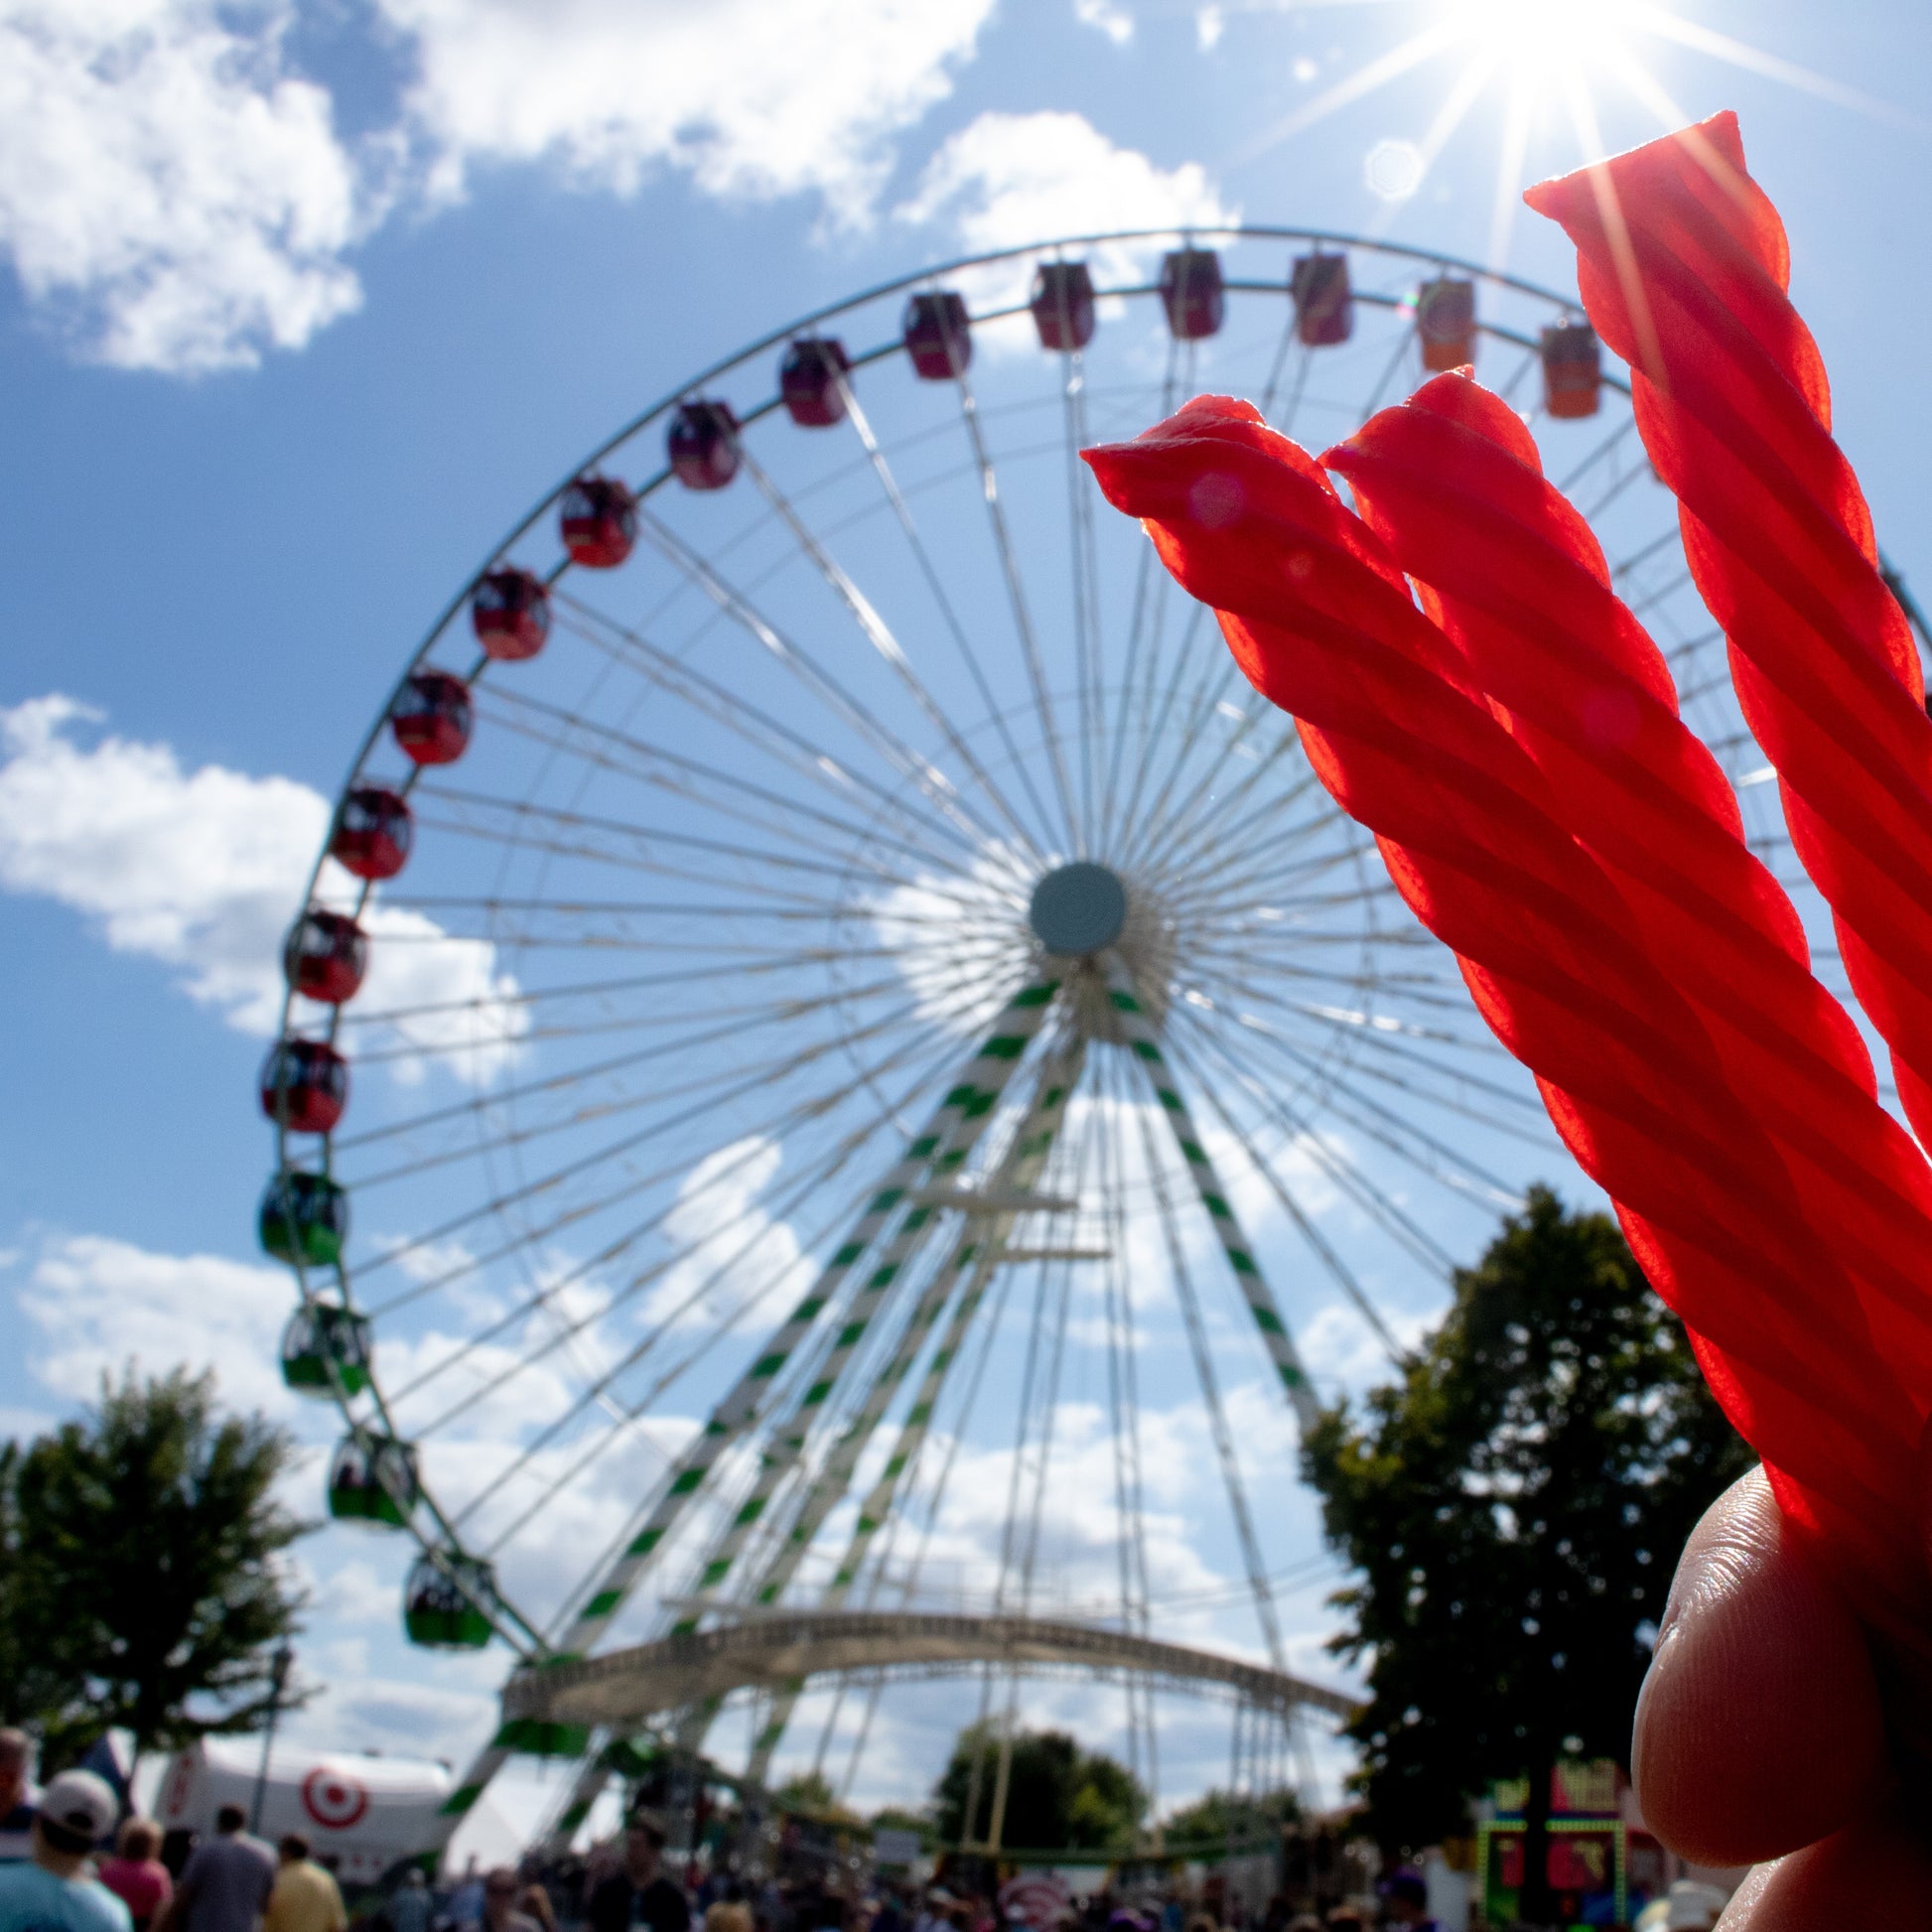 Enjoying Red Vines Original Red Licorice Candy at the fair